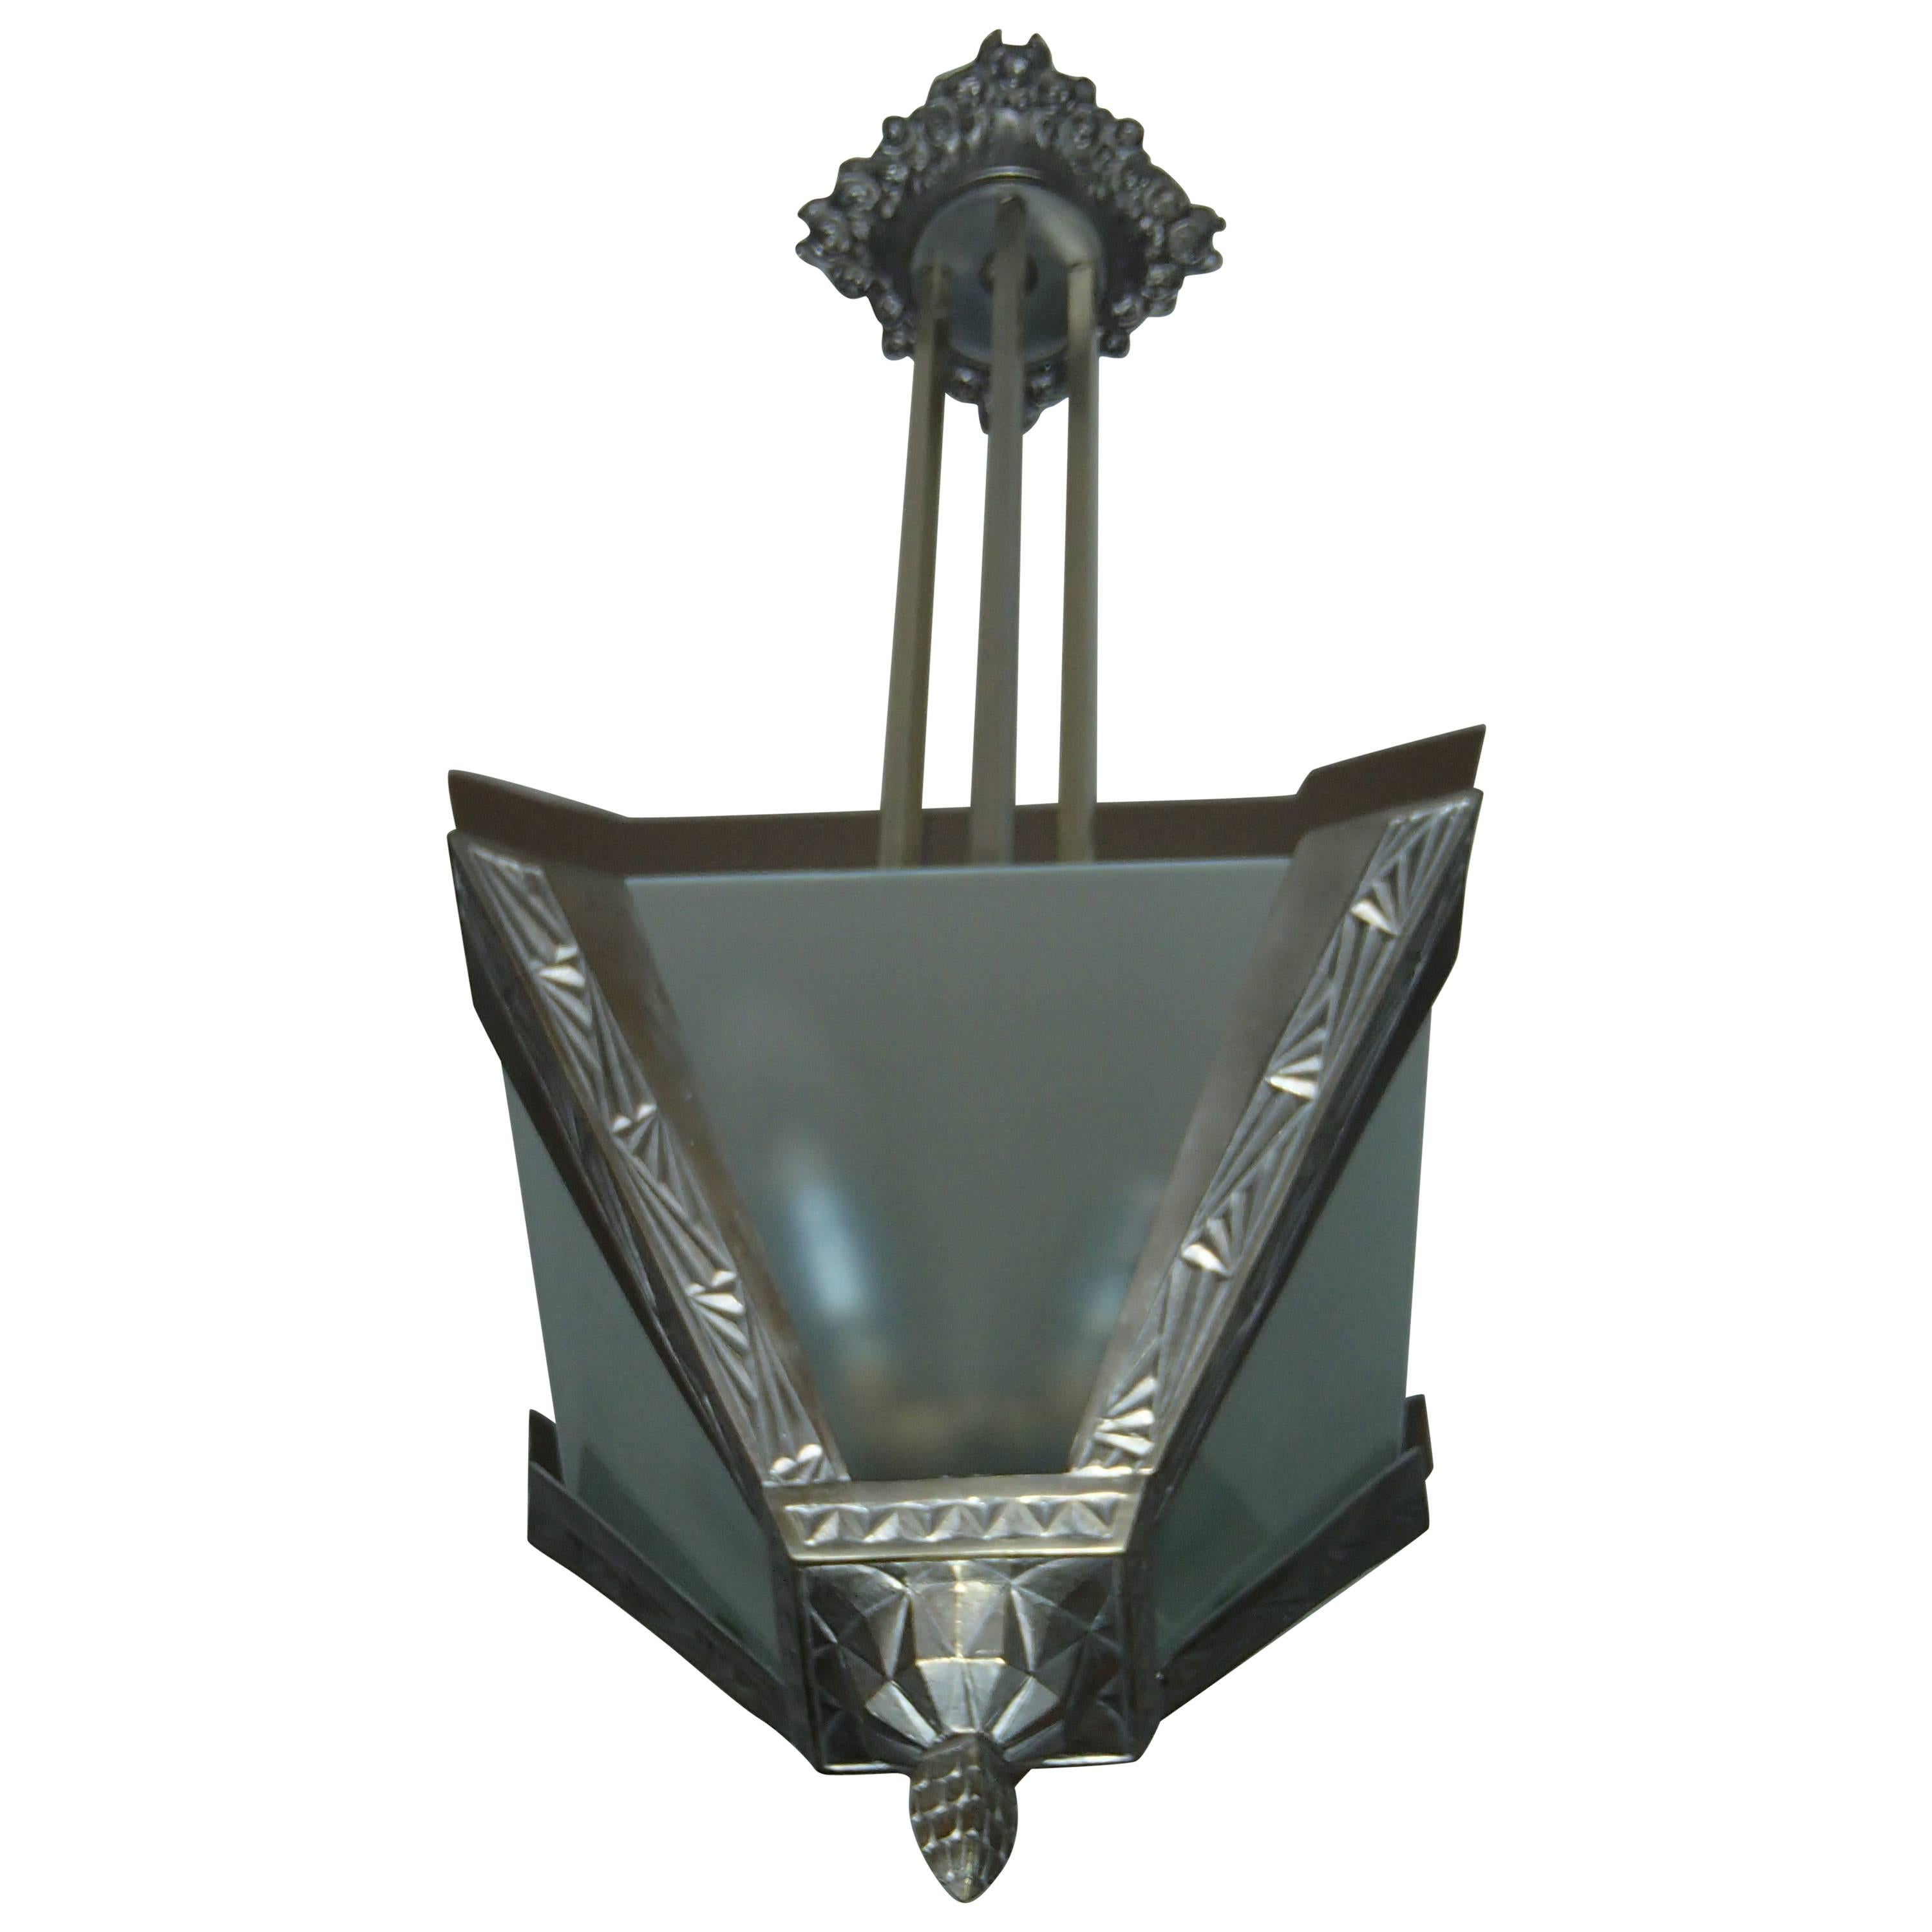 Art Deco geometric  bronze nickeled chandelier with satined glass For Sale